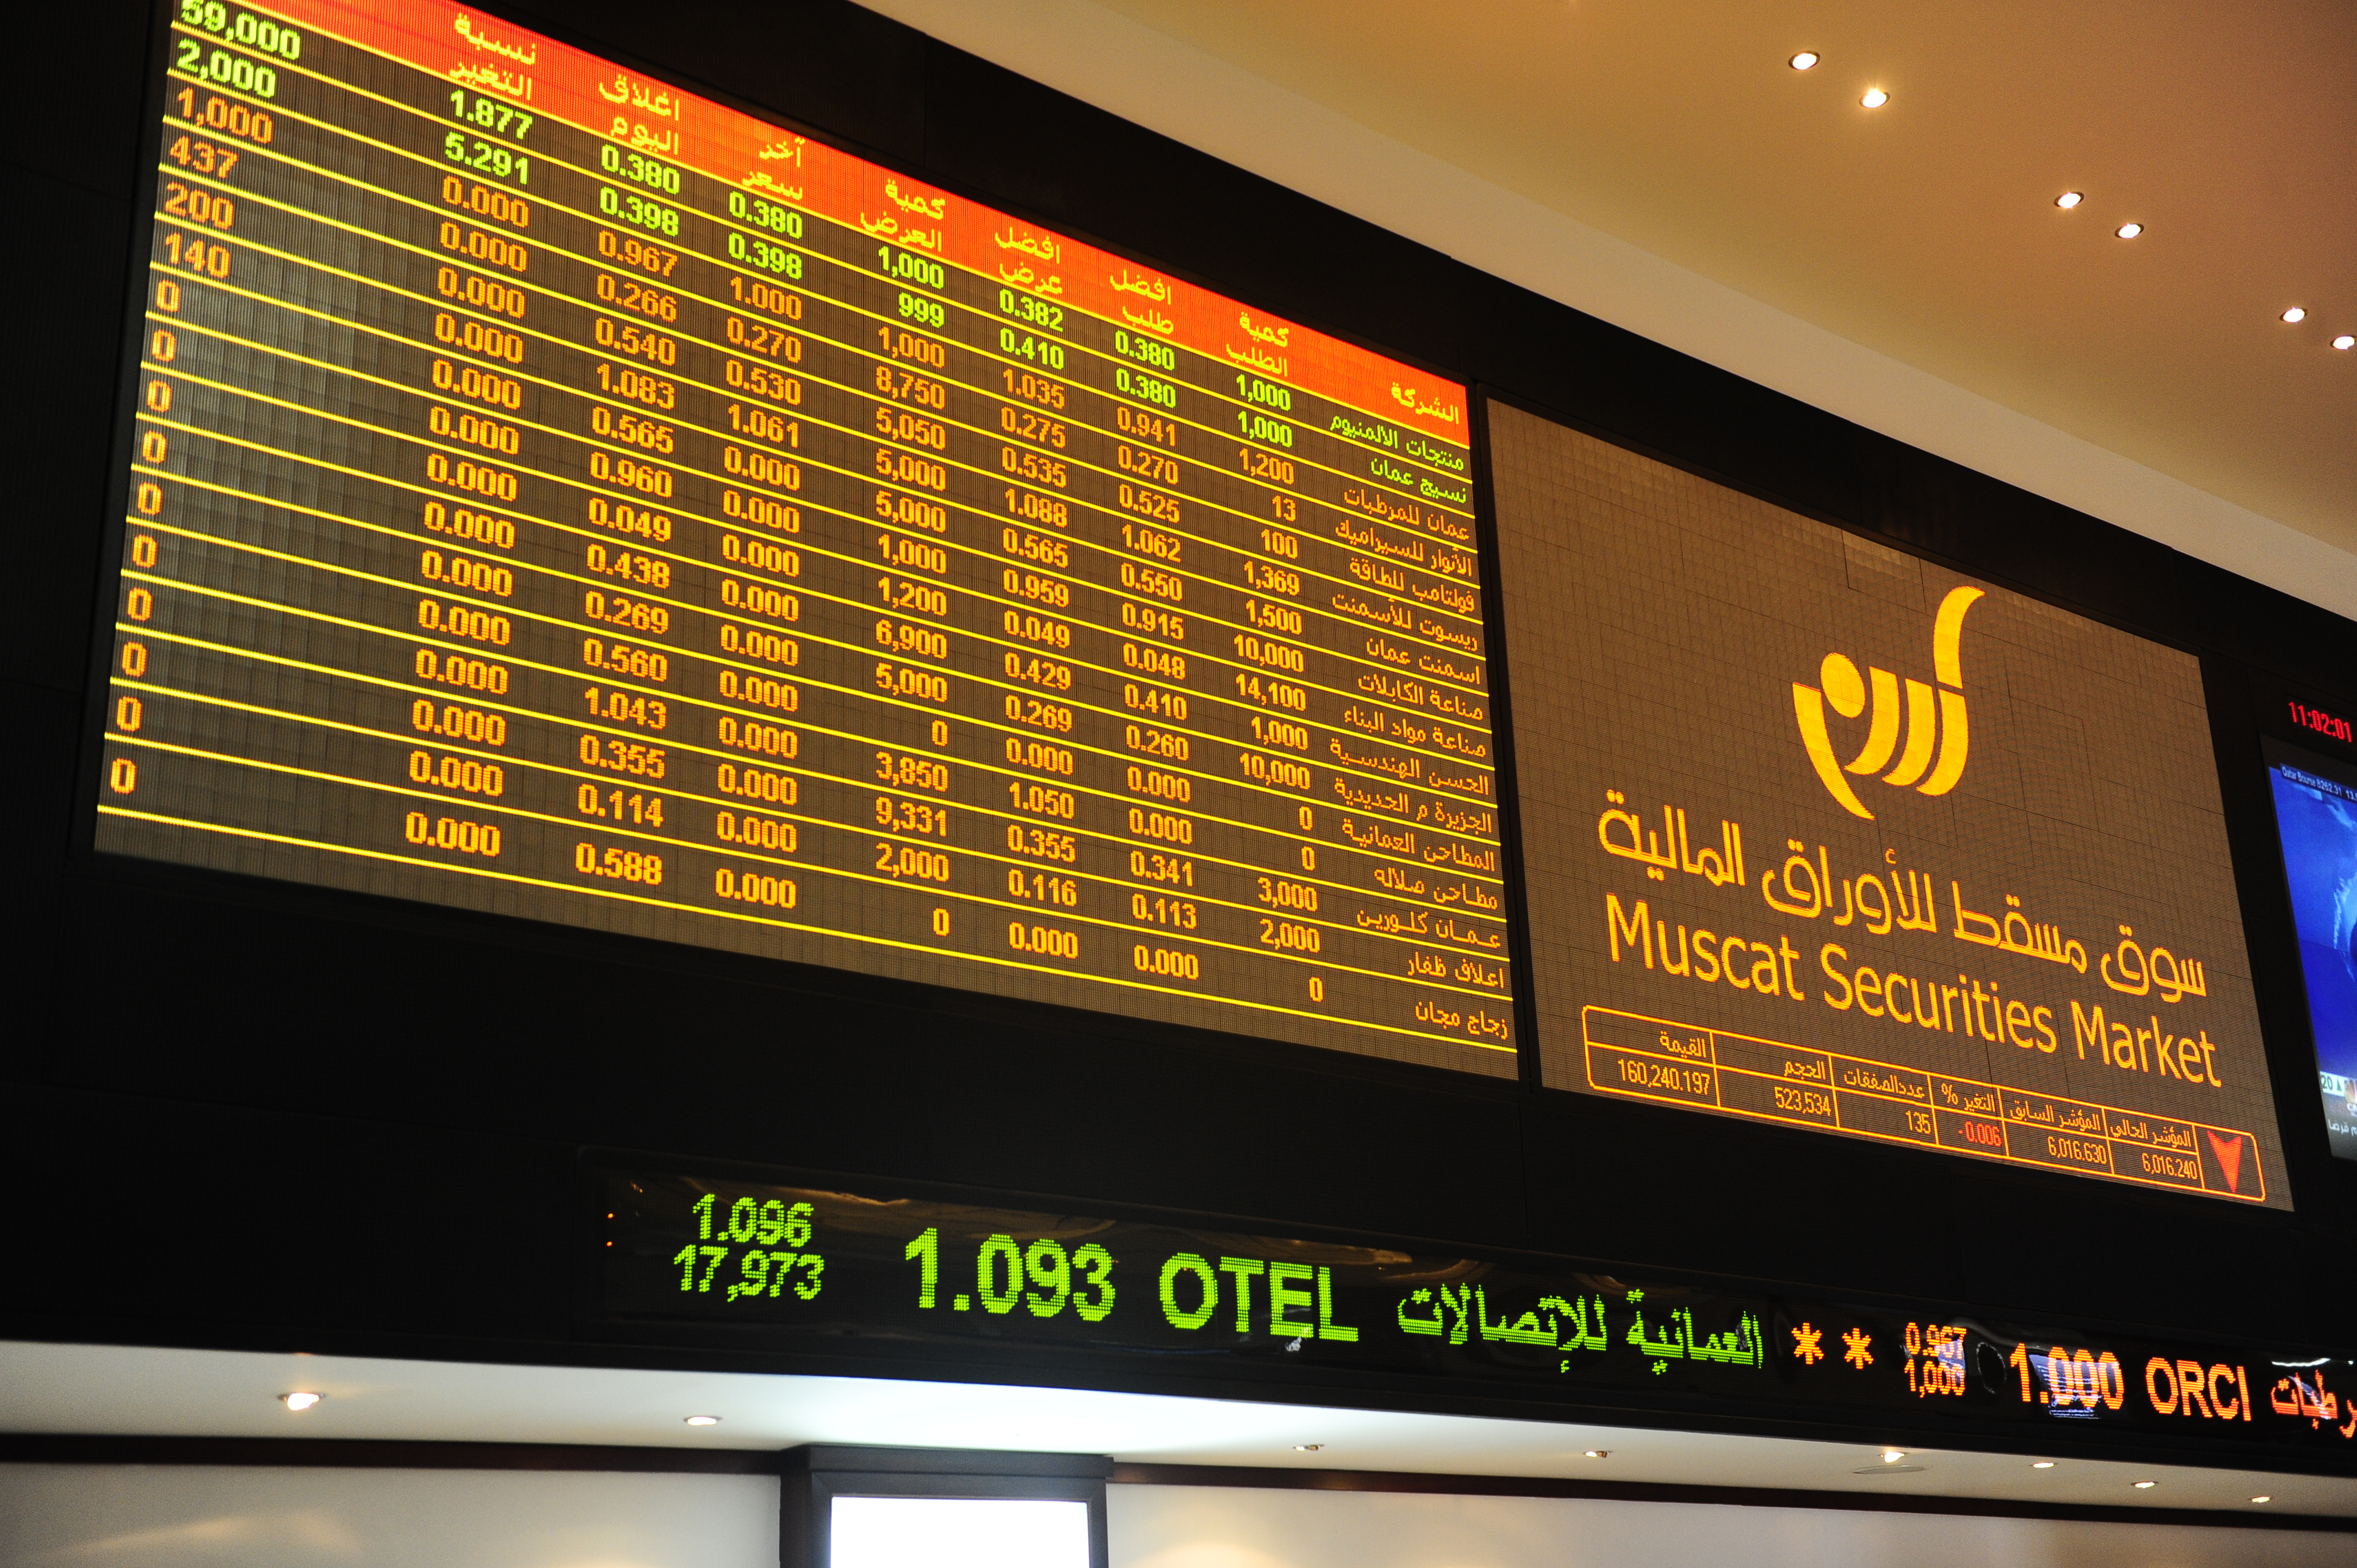 Oman shares advance on greater participation